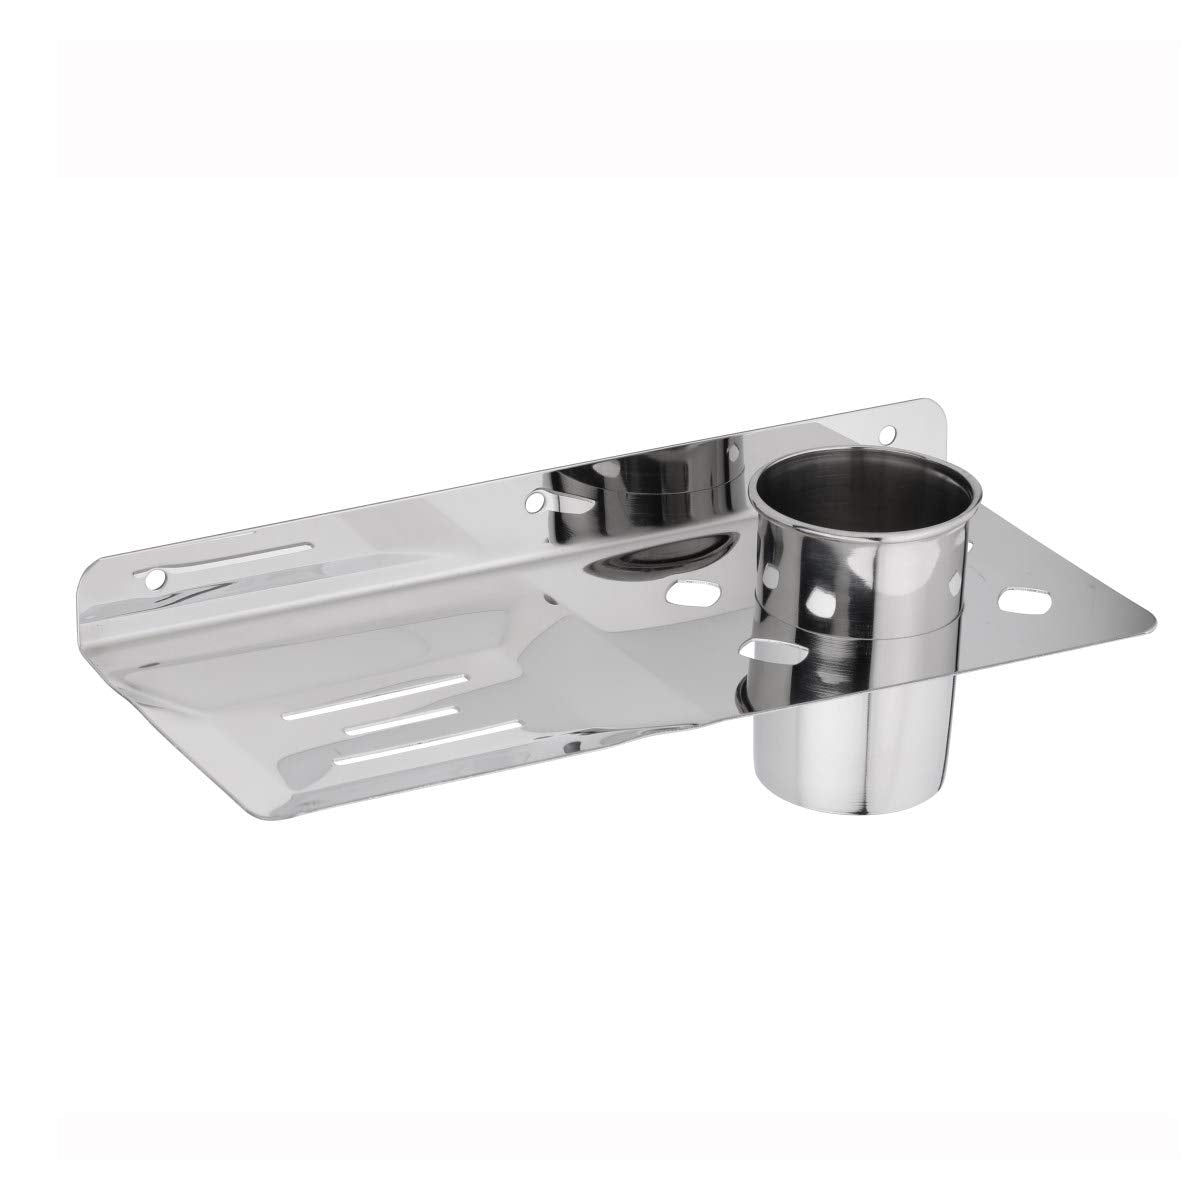 Plantex Platinum Stainless Steel Soap Dish with Tumbler Holder Bathroom Accessories - Pack of 4